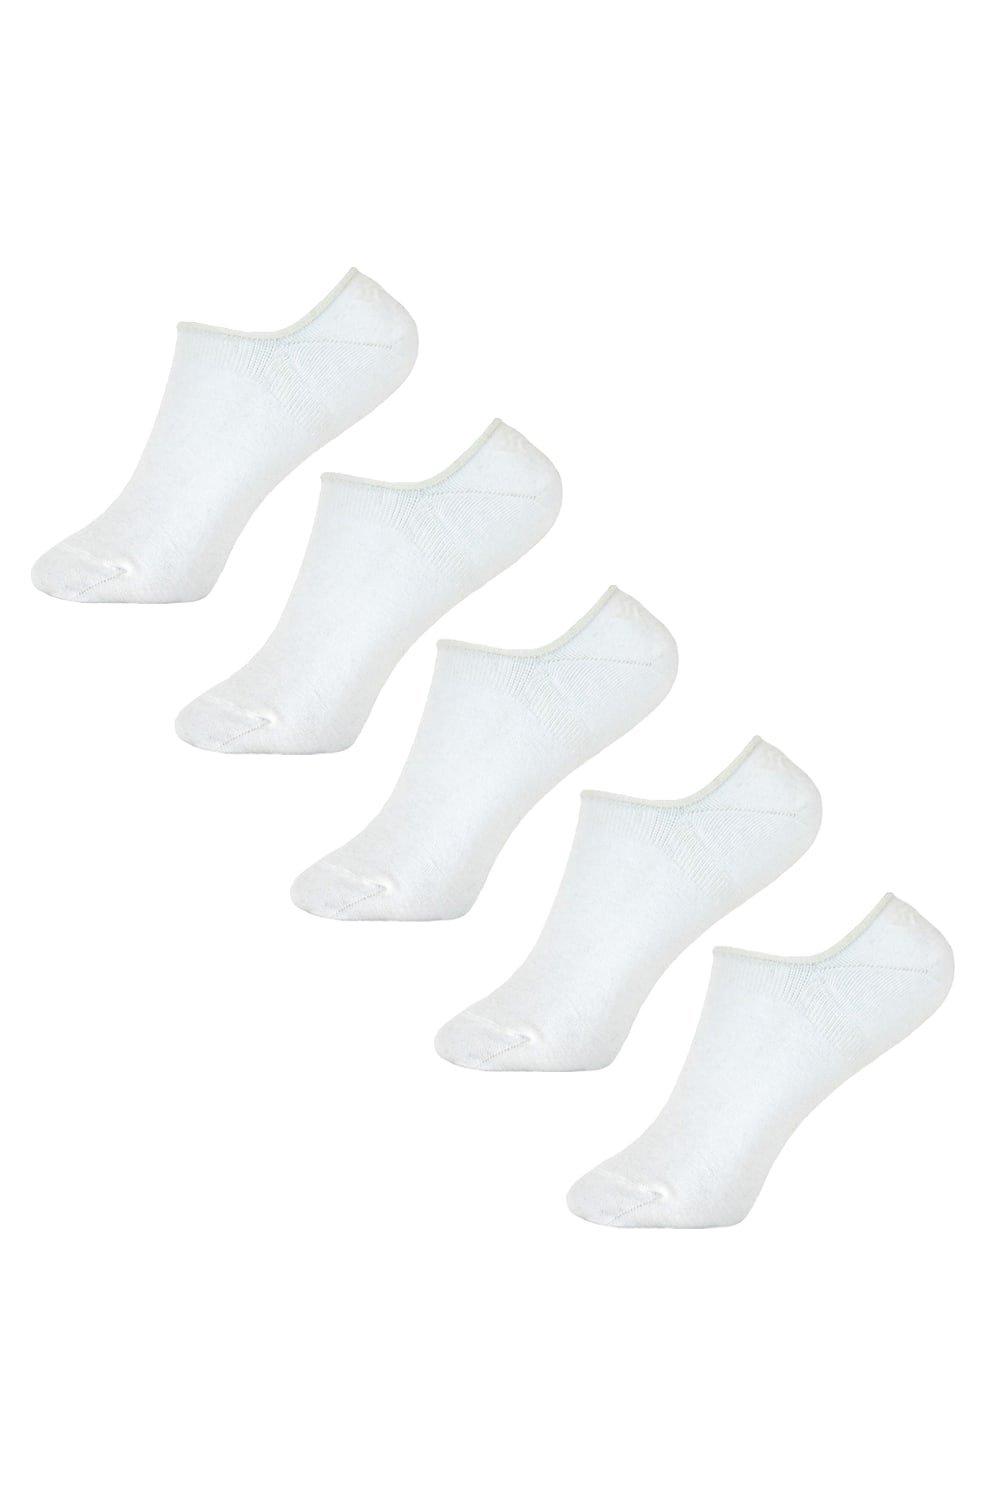 Cotton Rich Invisible Socks (5 Pairs)